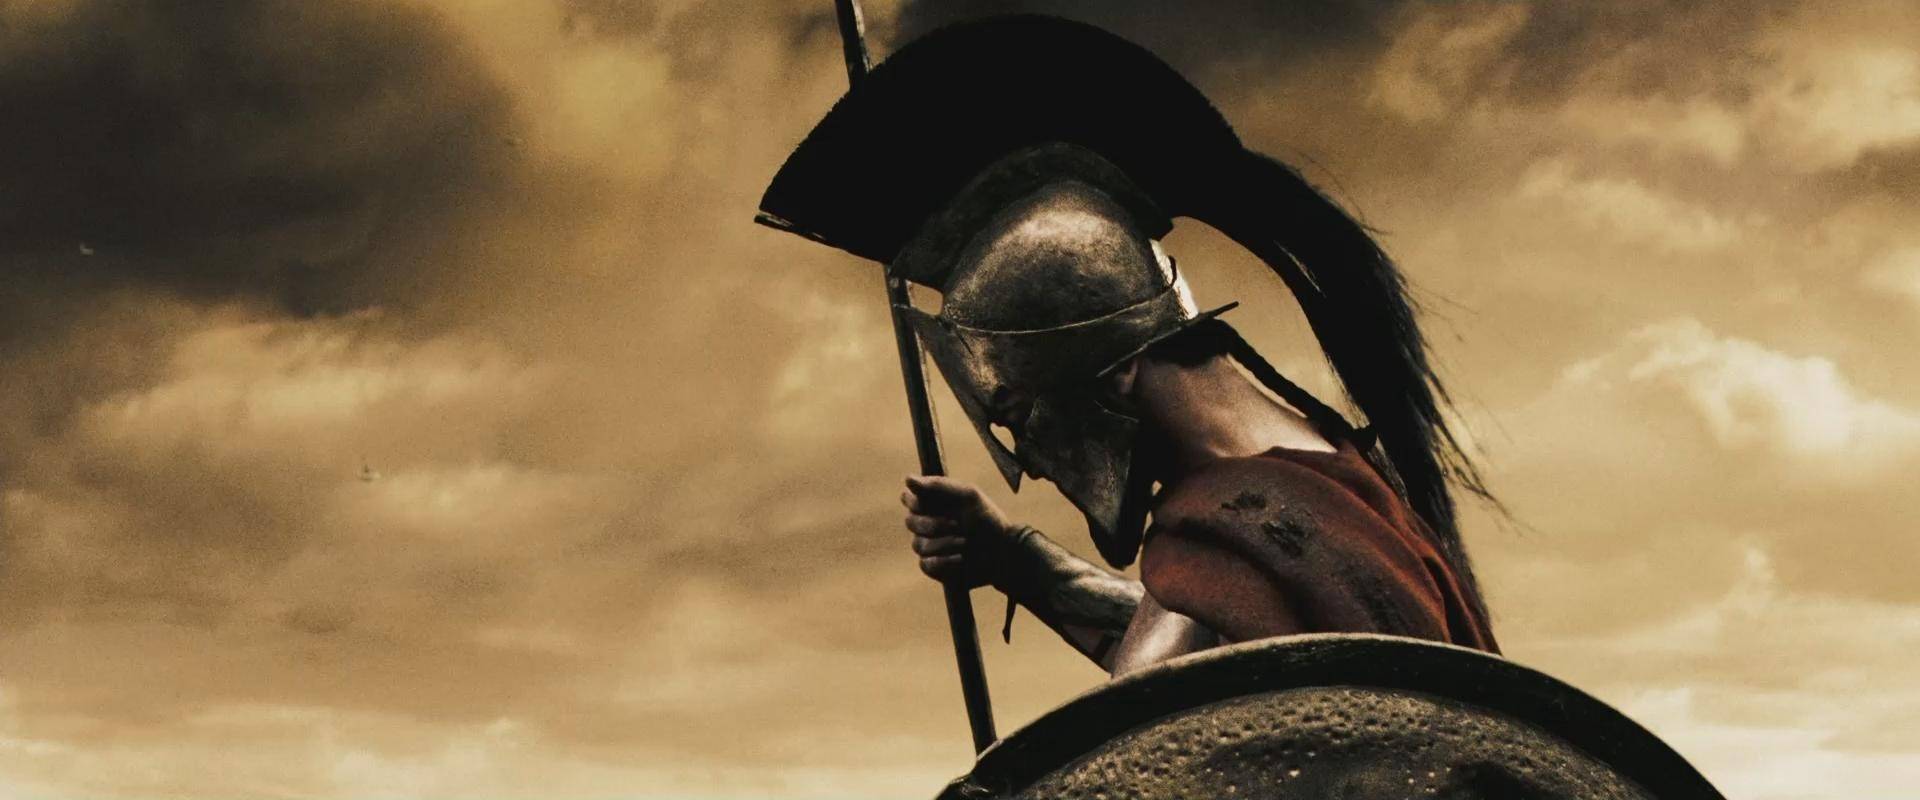 Battles That Made History: The 300